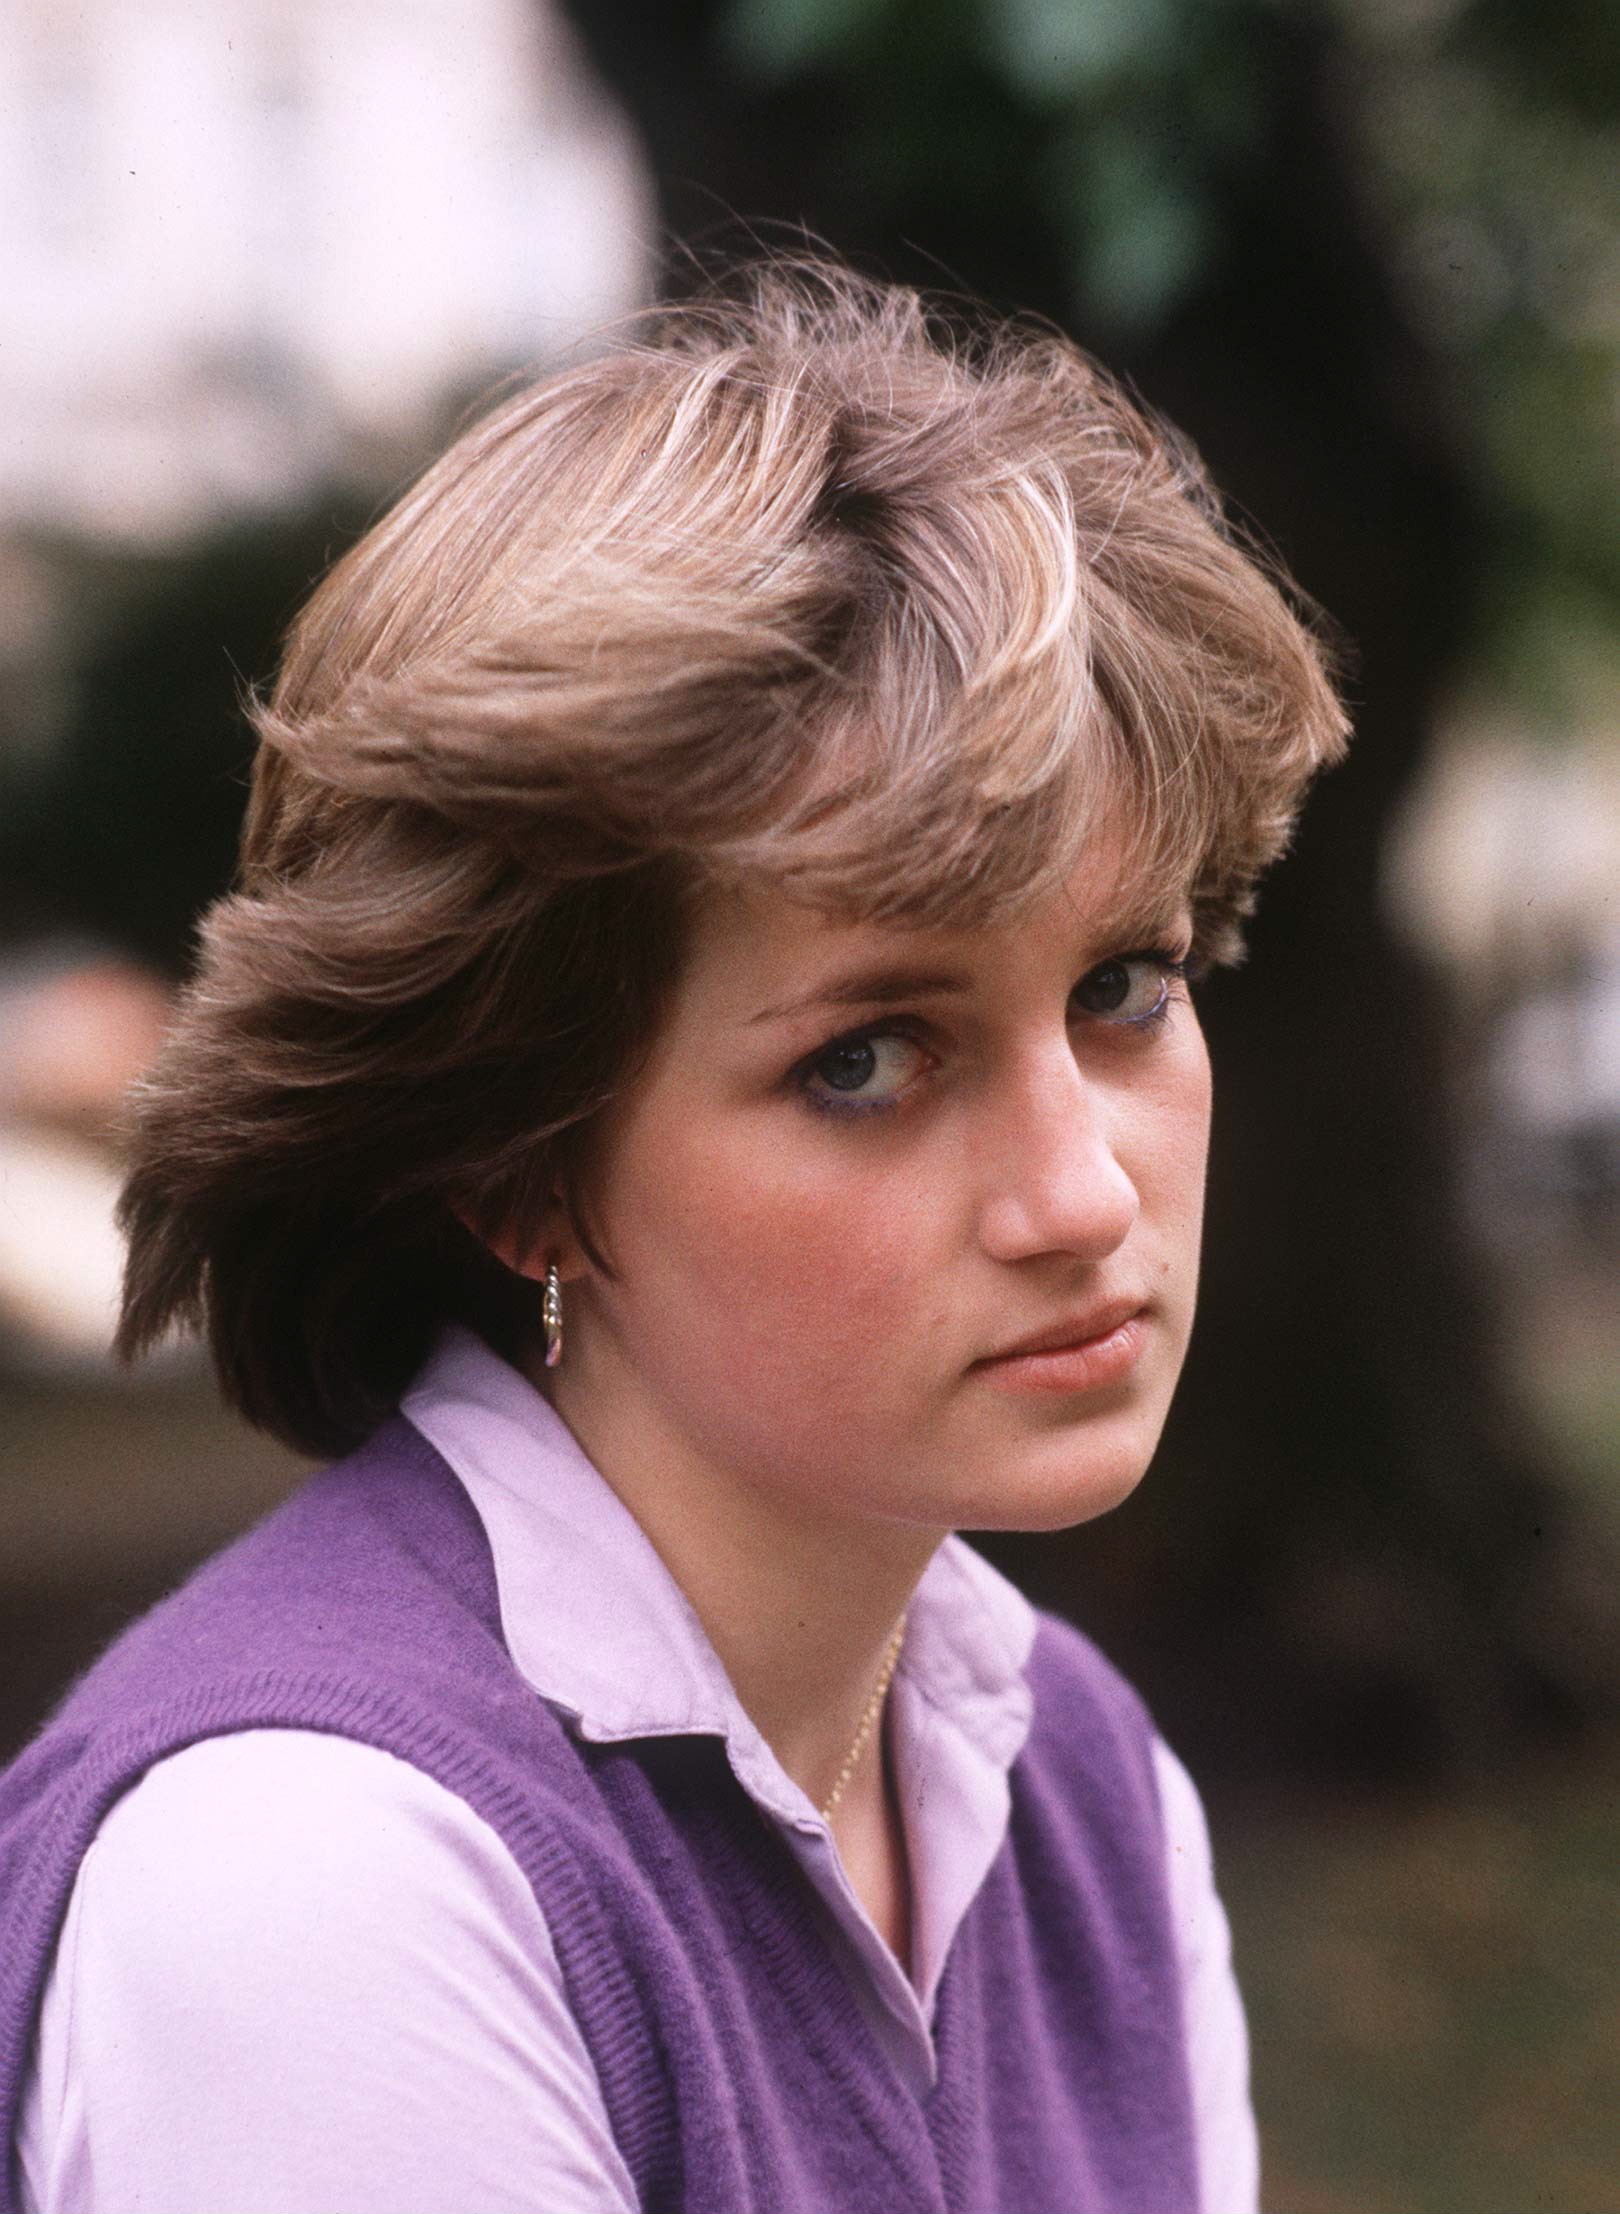 Lady Diana Spencer, looking pensive and shy, aged 19, at the Young England Kindergarten Nursery School in Pimlico, London, on September 17, 1980 | Source: Getty Images